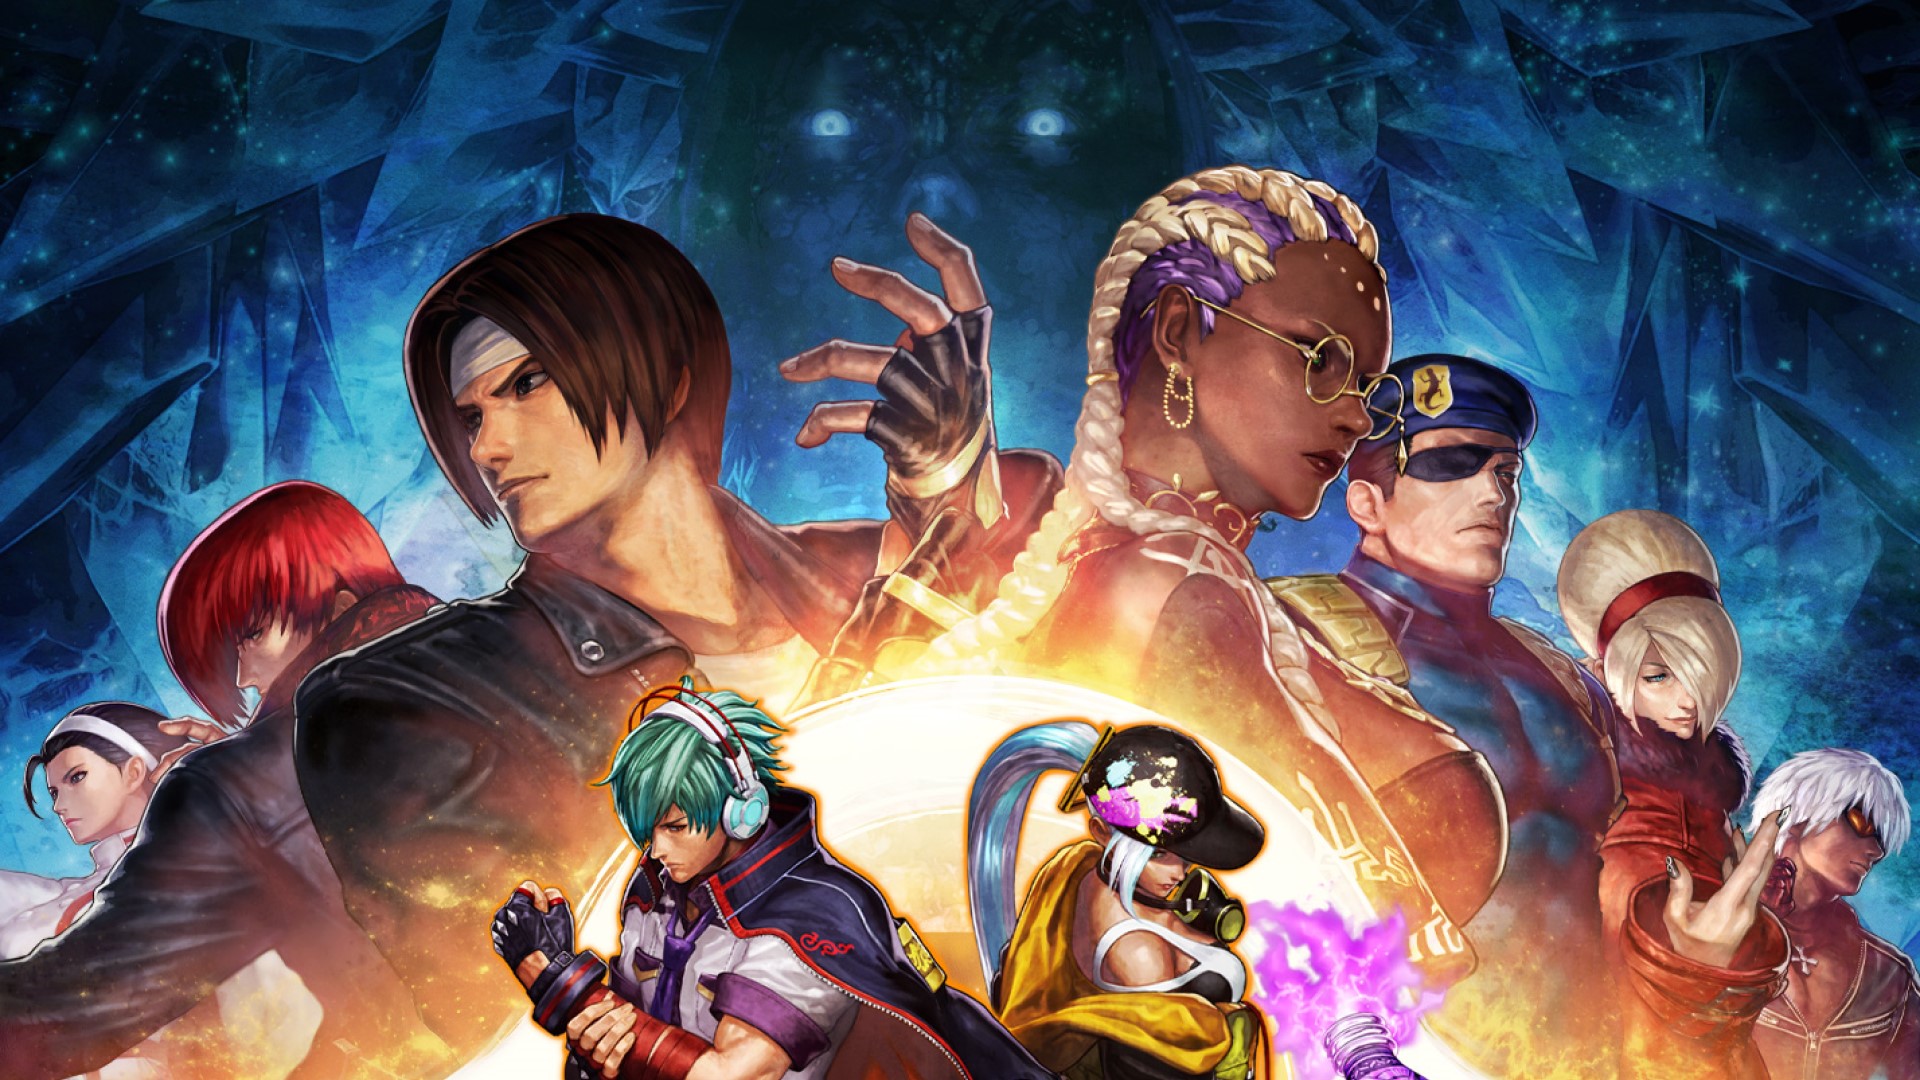 The King of Fighters 15 Devs Will “Review Requests” for DLC Characters